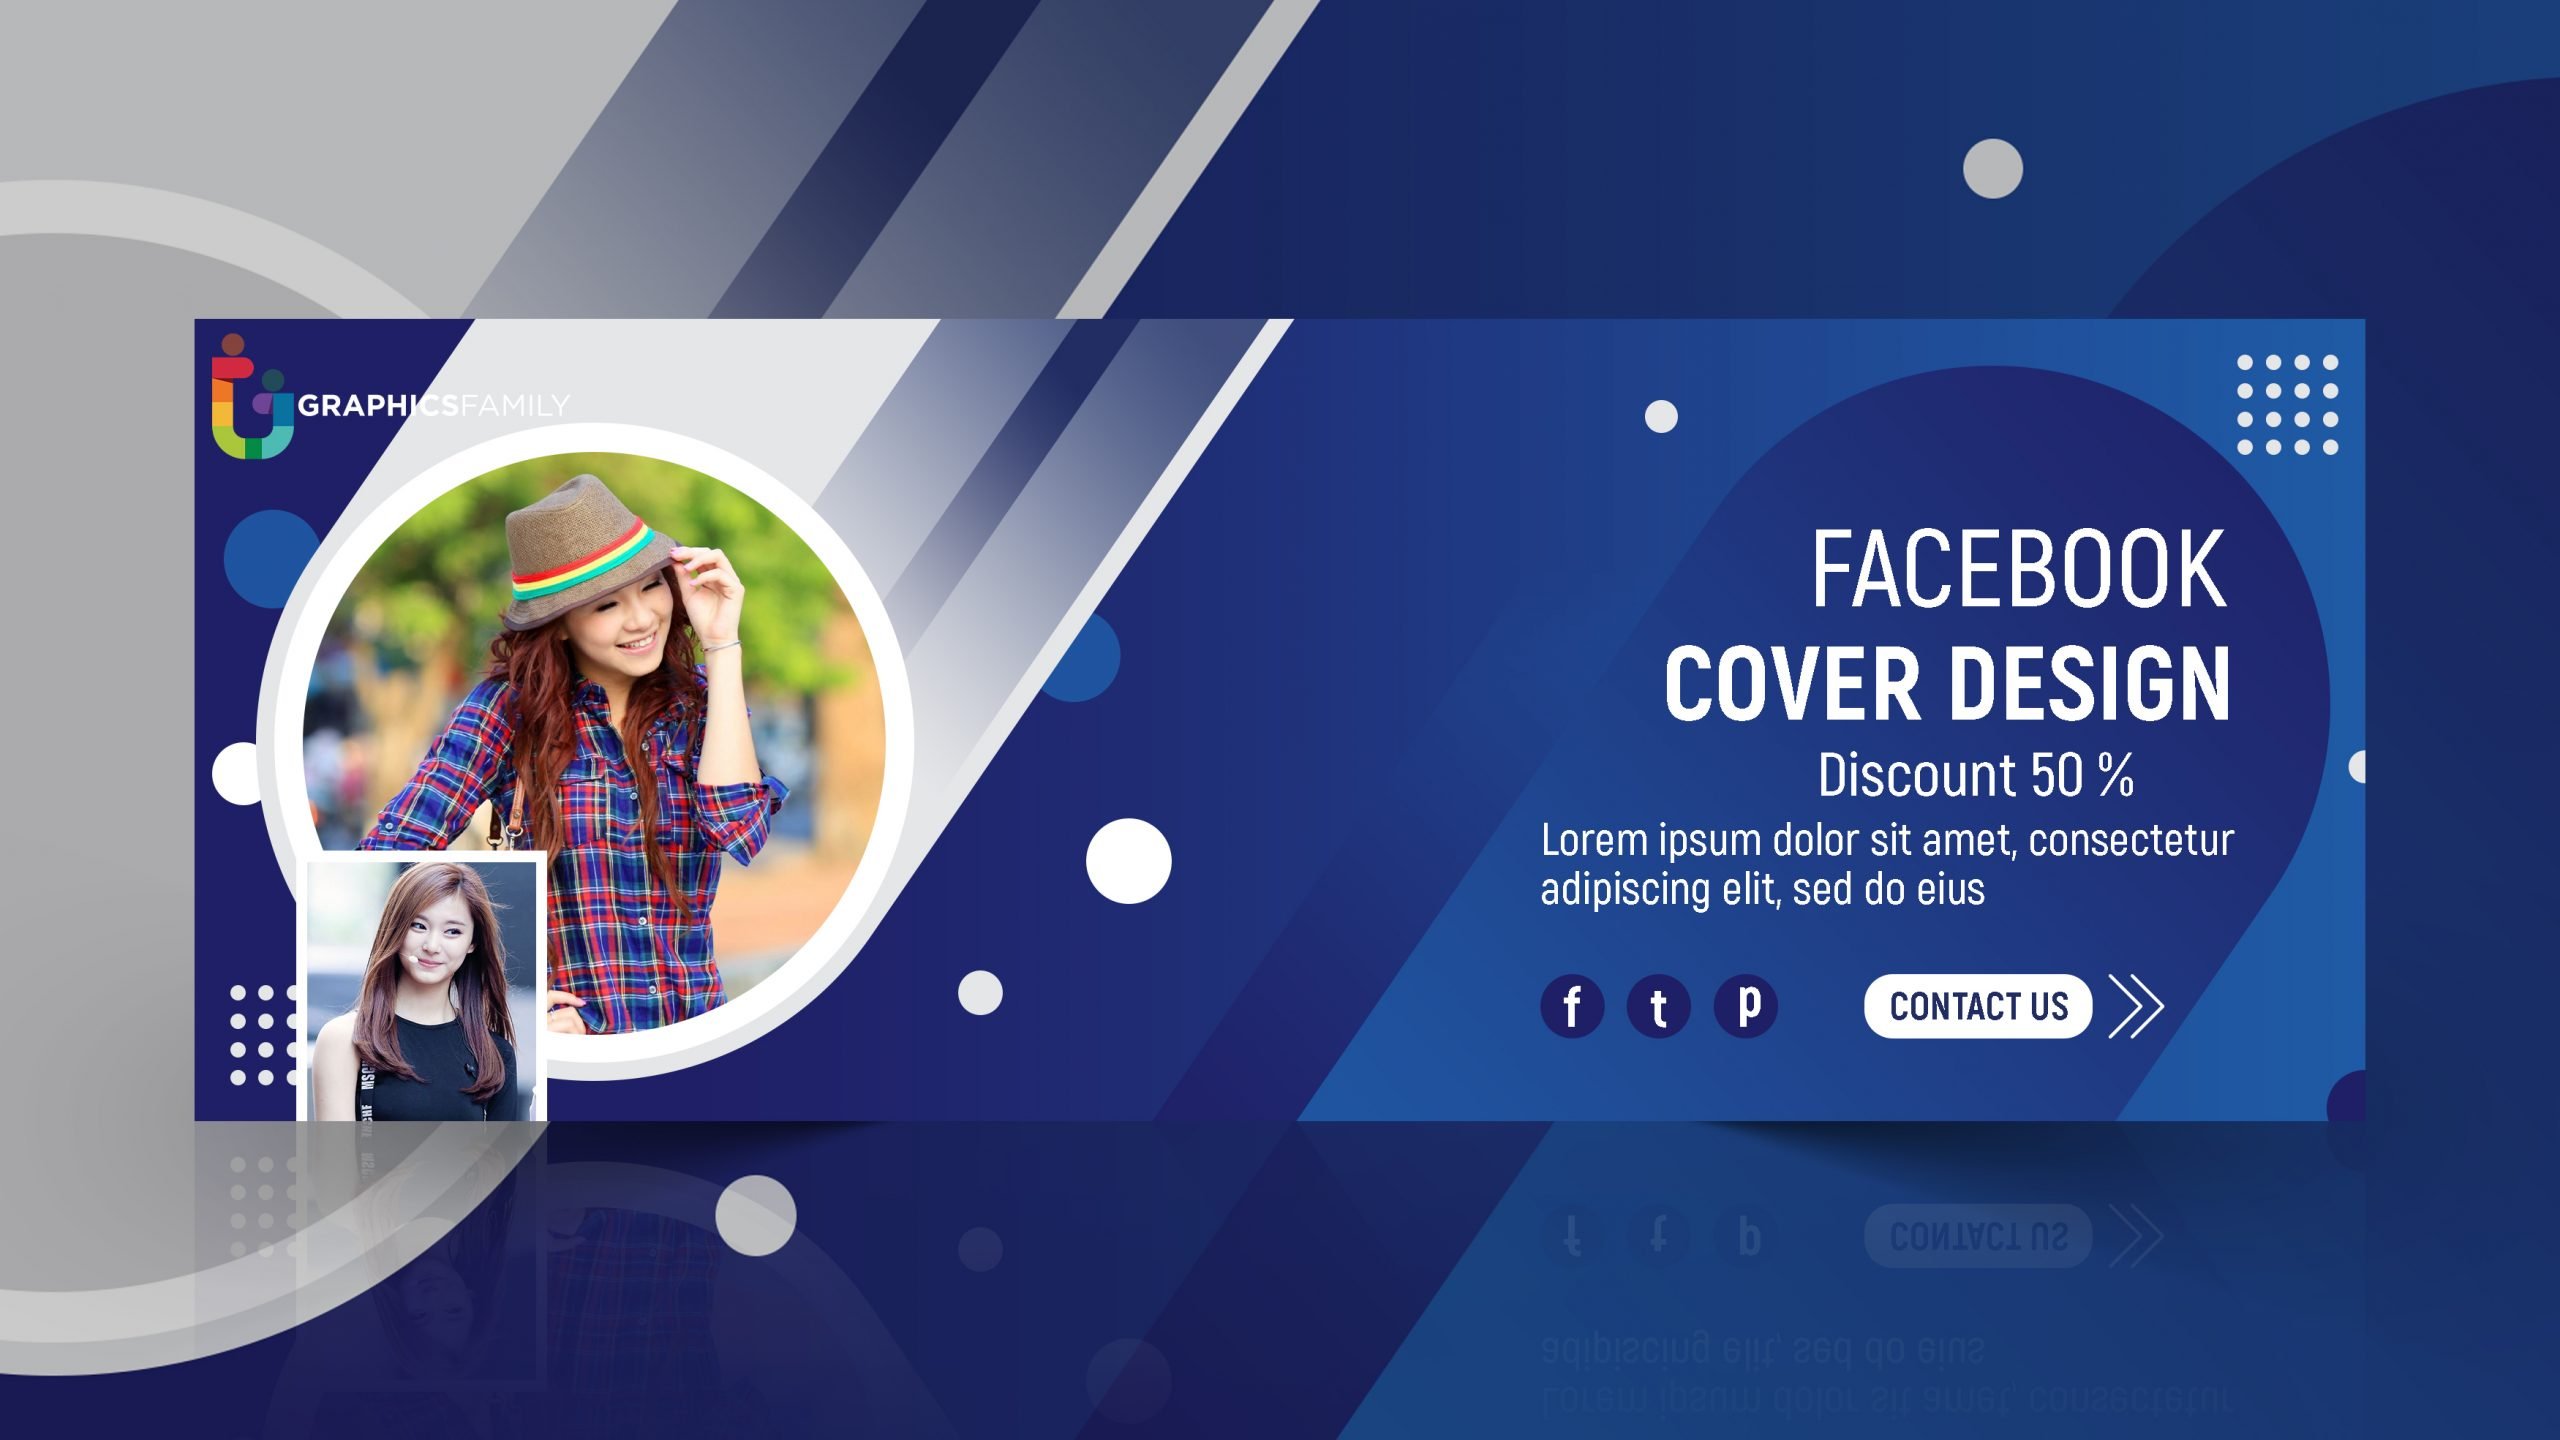 Free Facebook Cover Templates Psd 3 Free Facebook Cover Mock ups In 